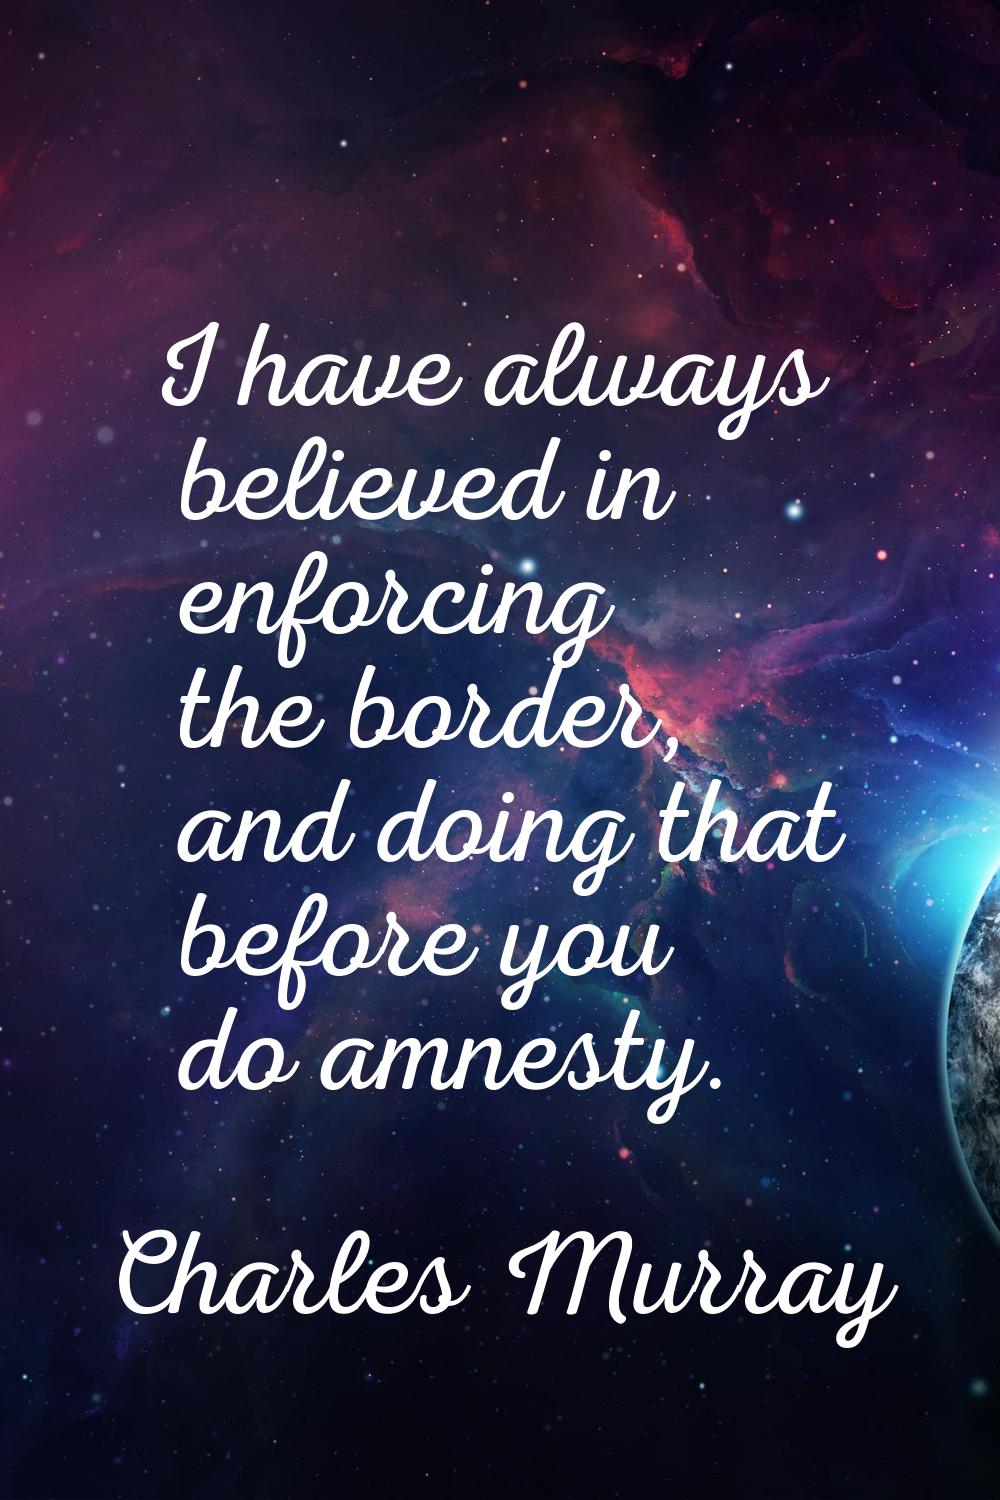 I have always believed in enforcing the border, and doing that before you do amnesty.